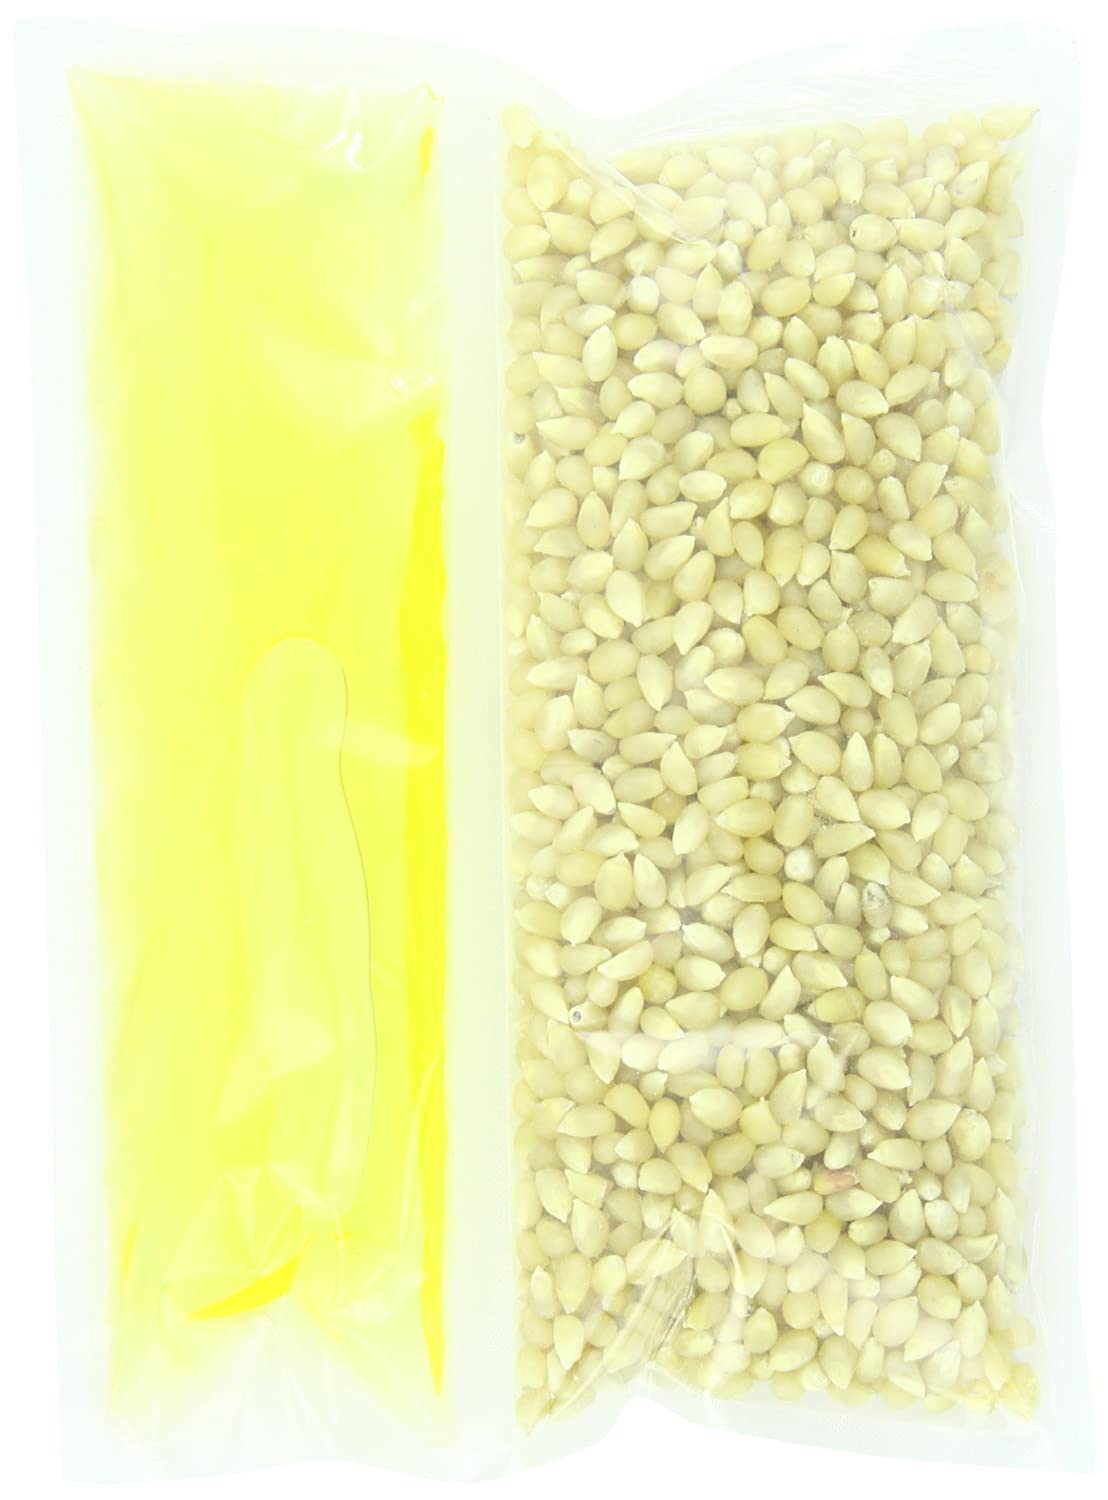 Snappy Popcorn Yellow Snap-Paks Yellow Popcorn, Canola Oil and Yellow Salt, 24 Count